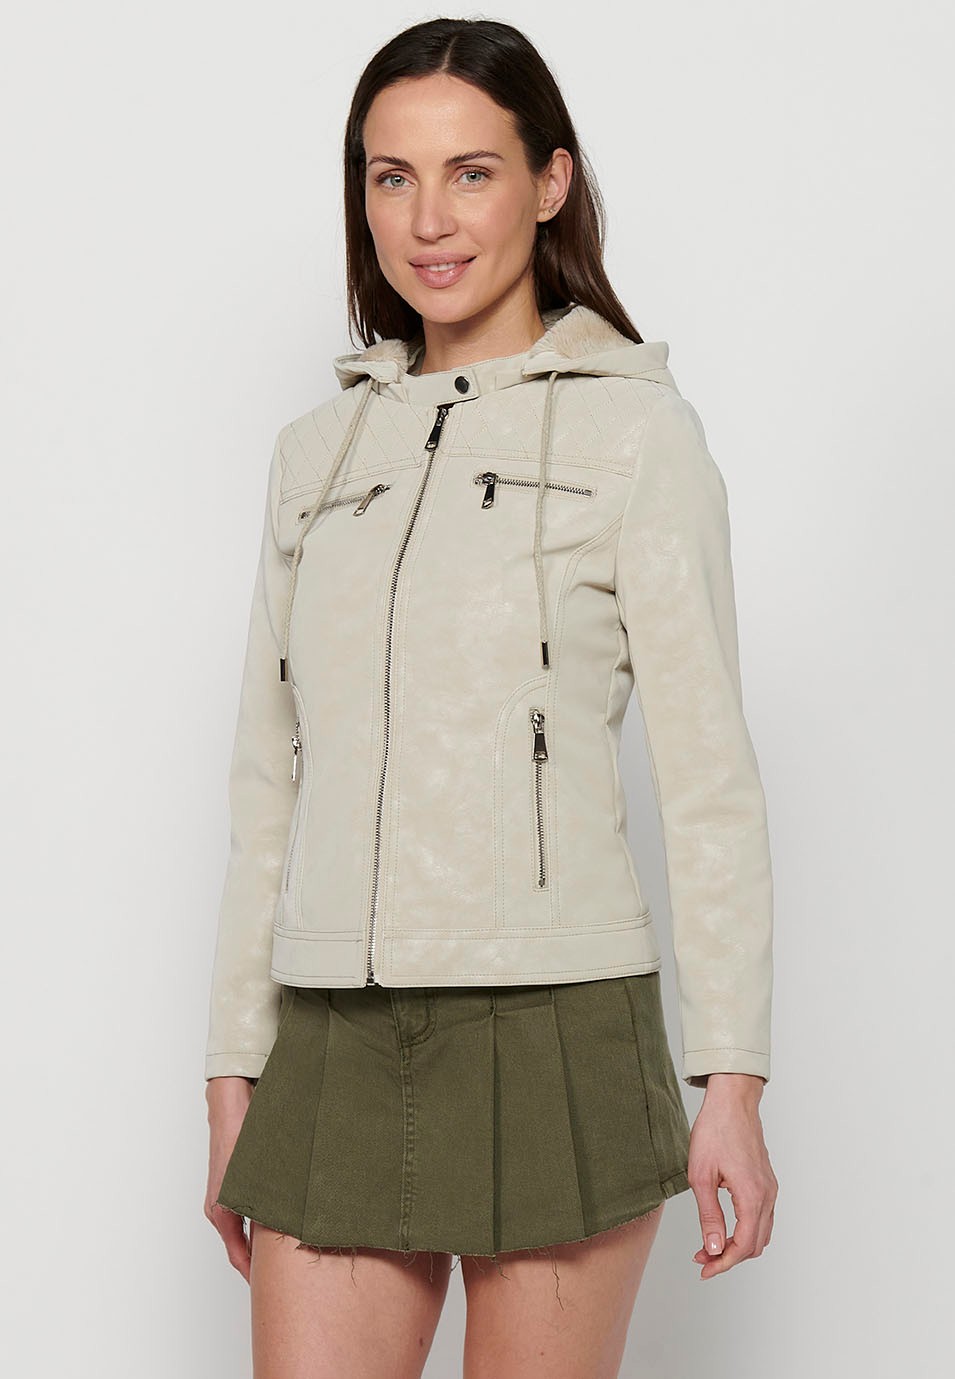 Jacket with long sleeves, hooded collar and front zipper closure. Off whitecolor for women 1